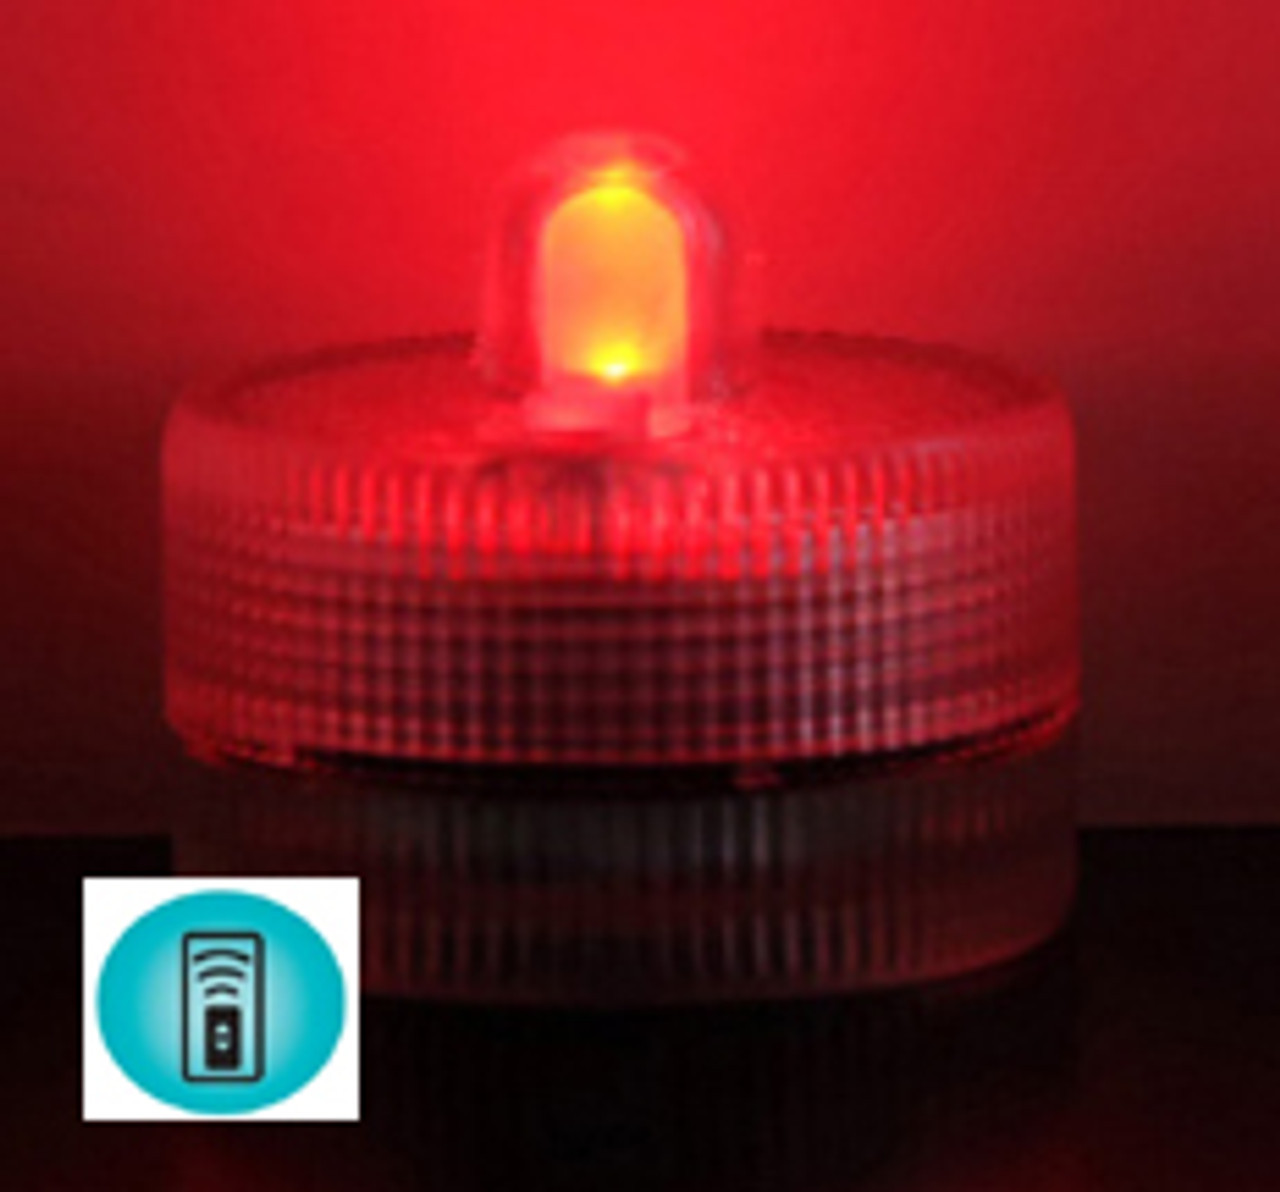 https://cdn11.bigcommerce.com/s-x1vm6a4952/images/stencil/1280x1280/products/6753/20298/sumix-1-red-set-of-10-submersible-remote-control-compatible-led-light-34__70031.1646434701.jpg?c=2